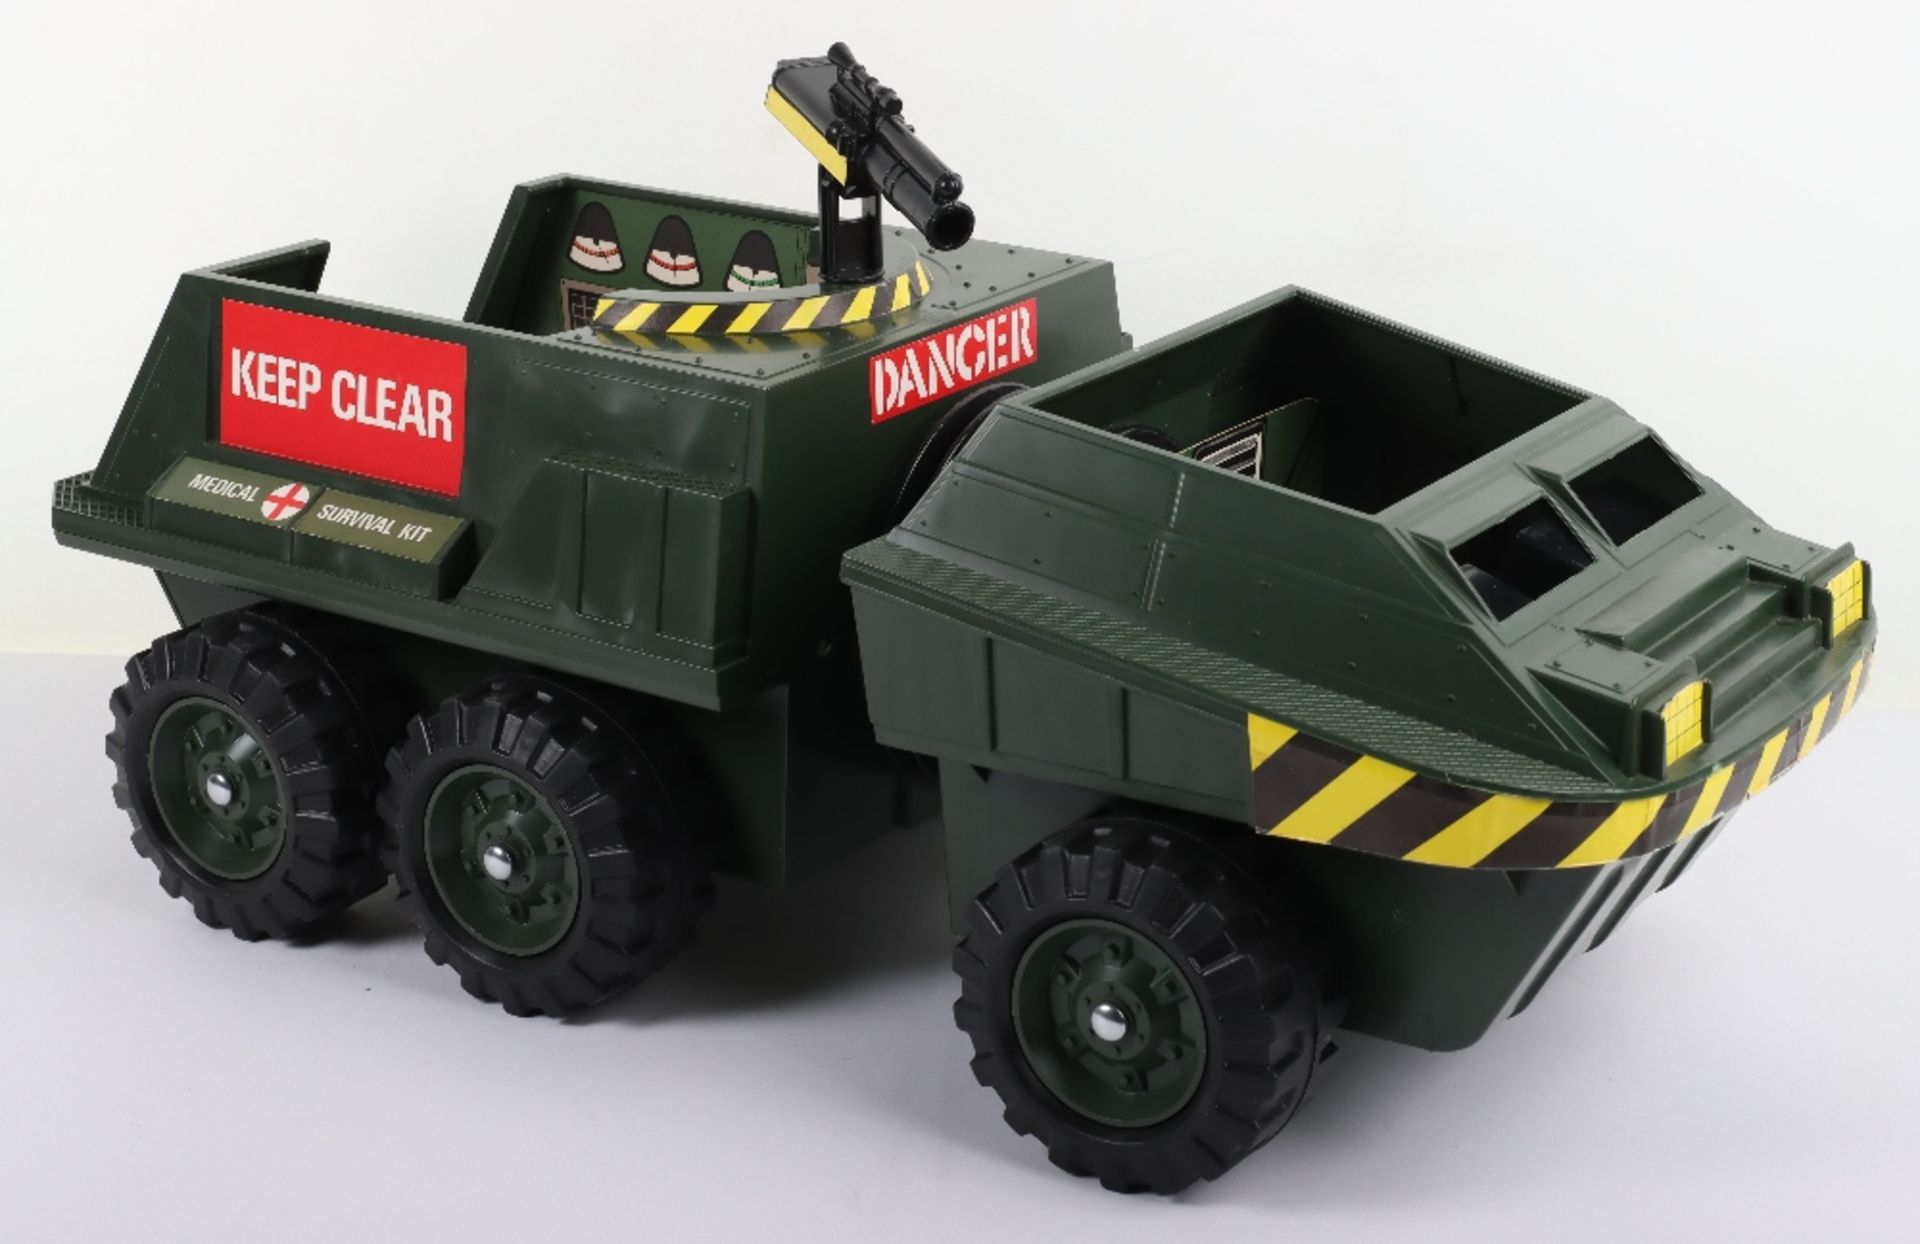 Boxed Original Palitoy Action Man Transport Command Multi-Terrain Vehicle - Image 9 of 9